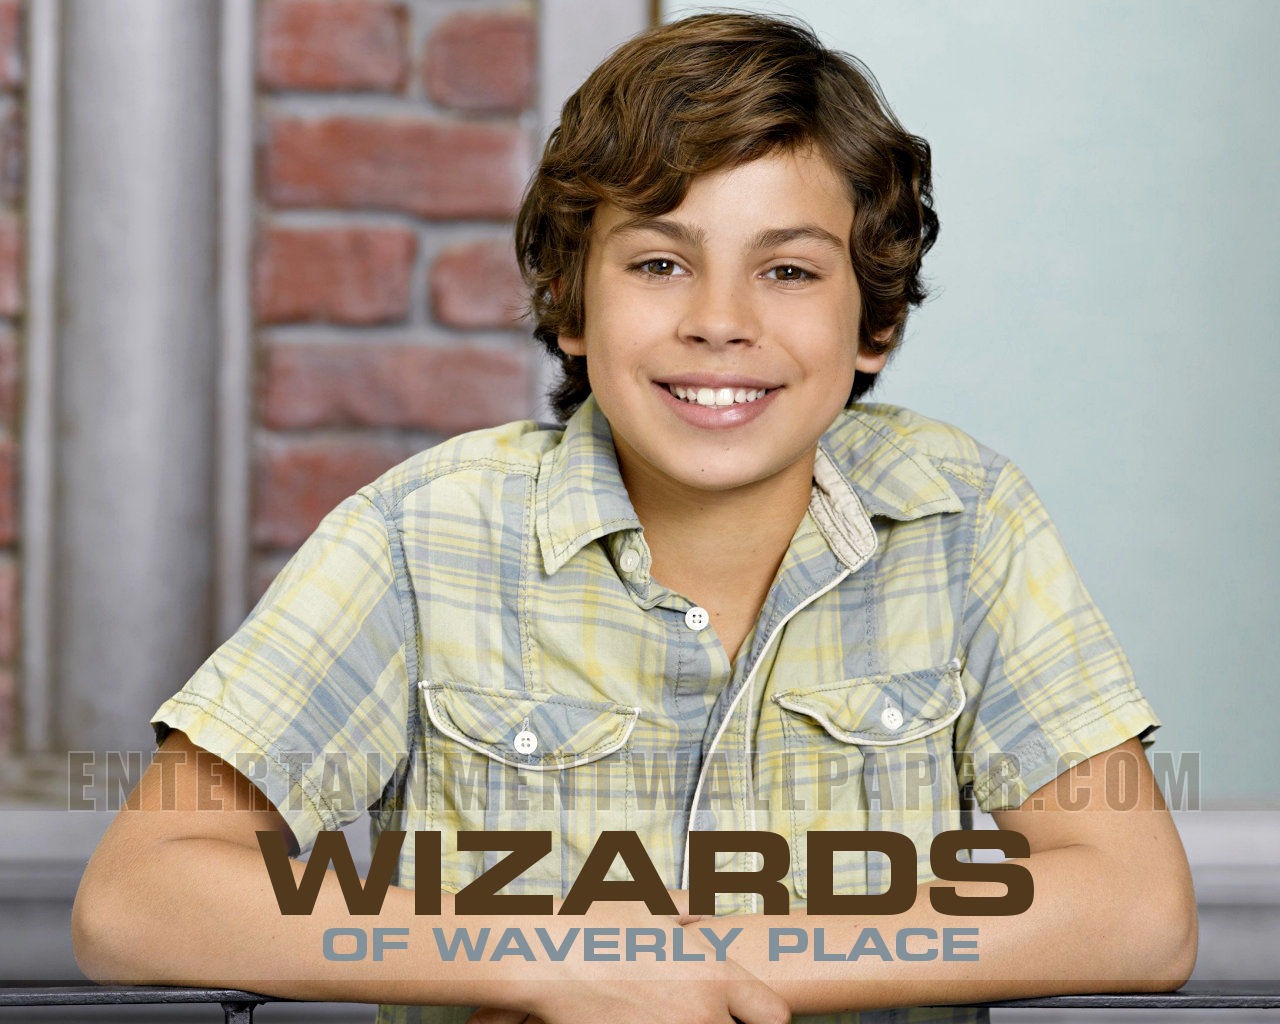 Wizards of Waverly Place wallpaper #18 - 1280x1024